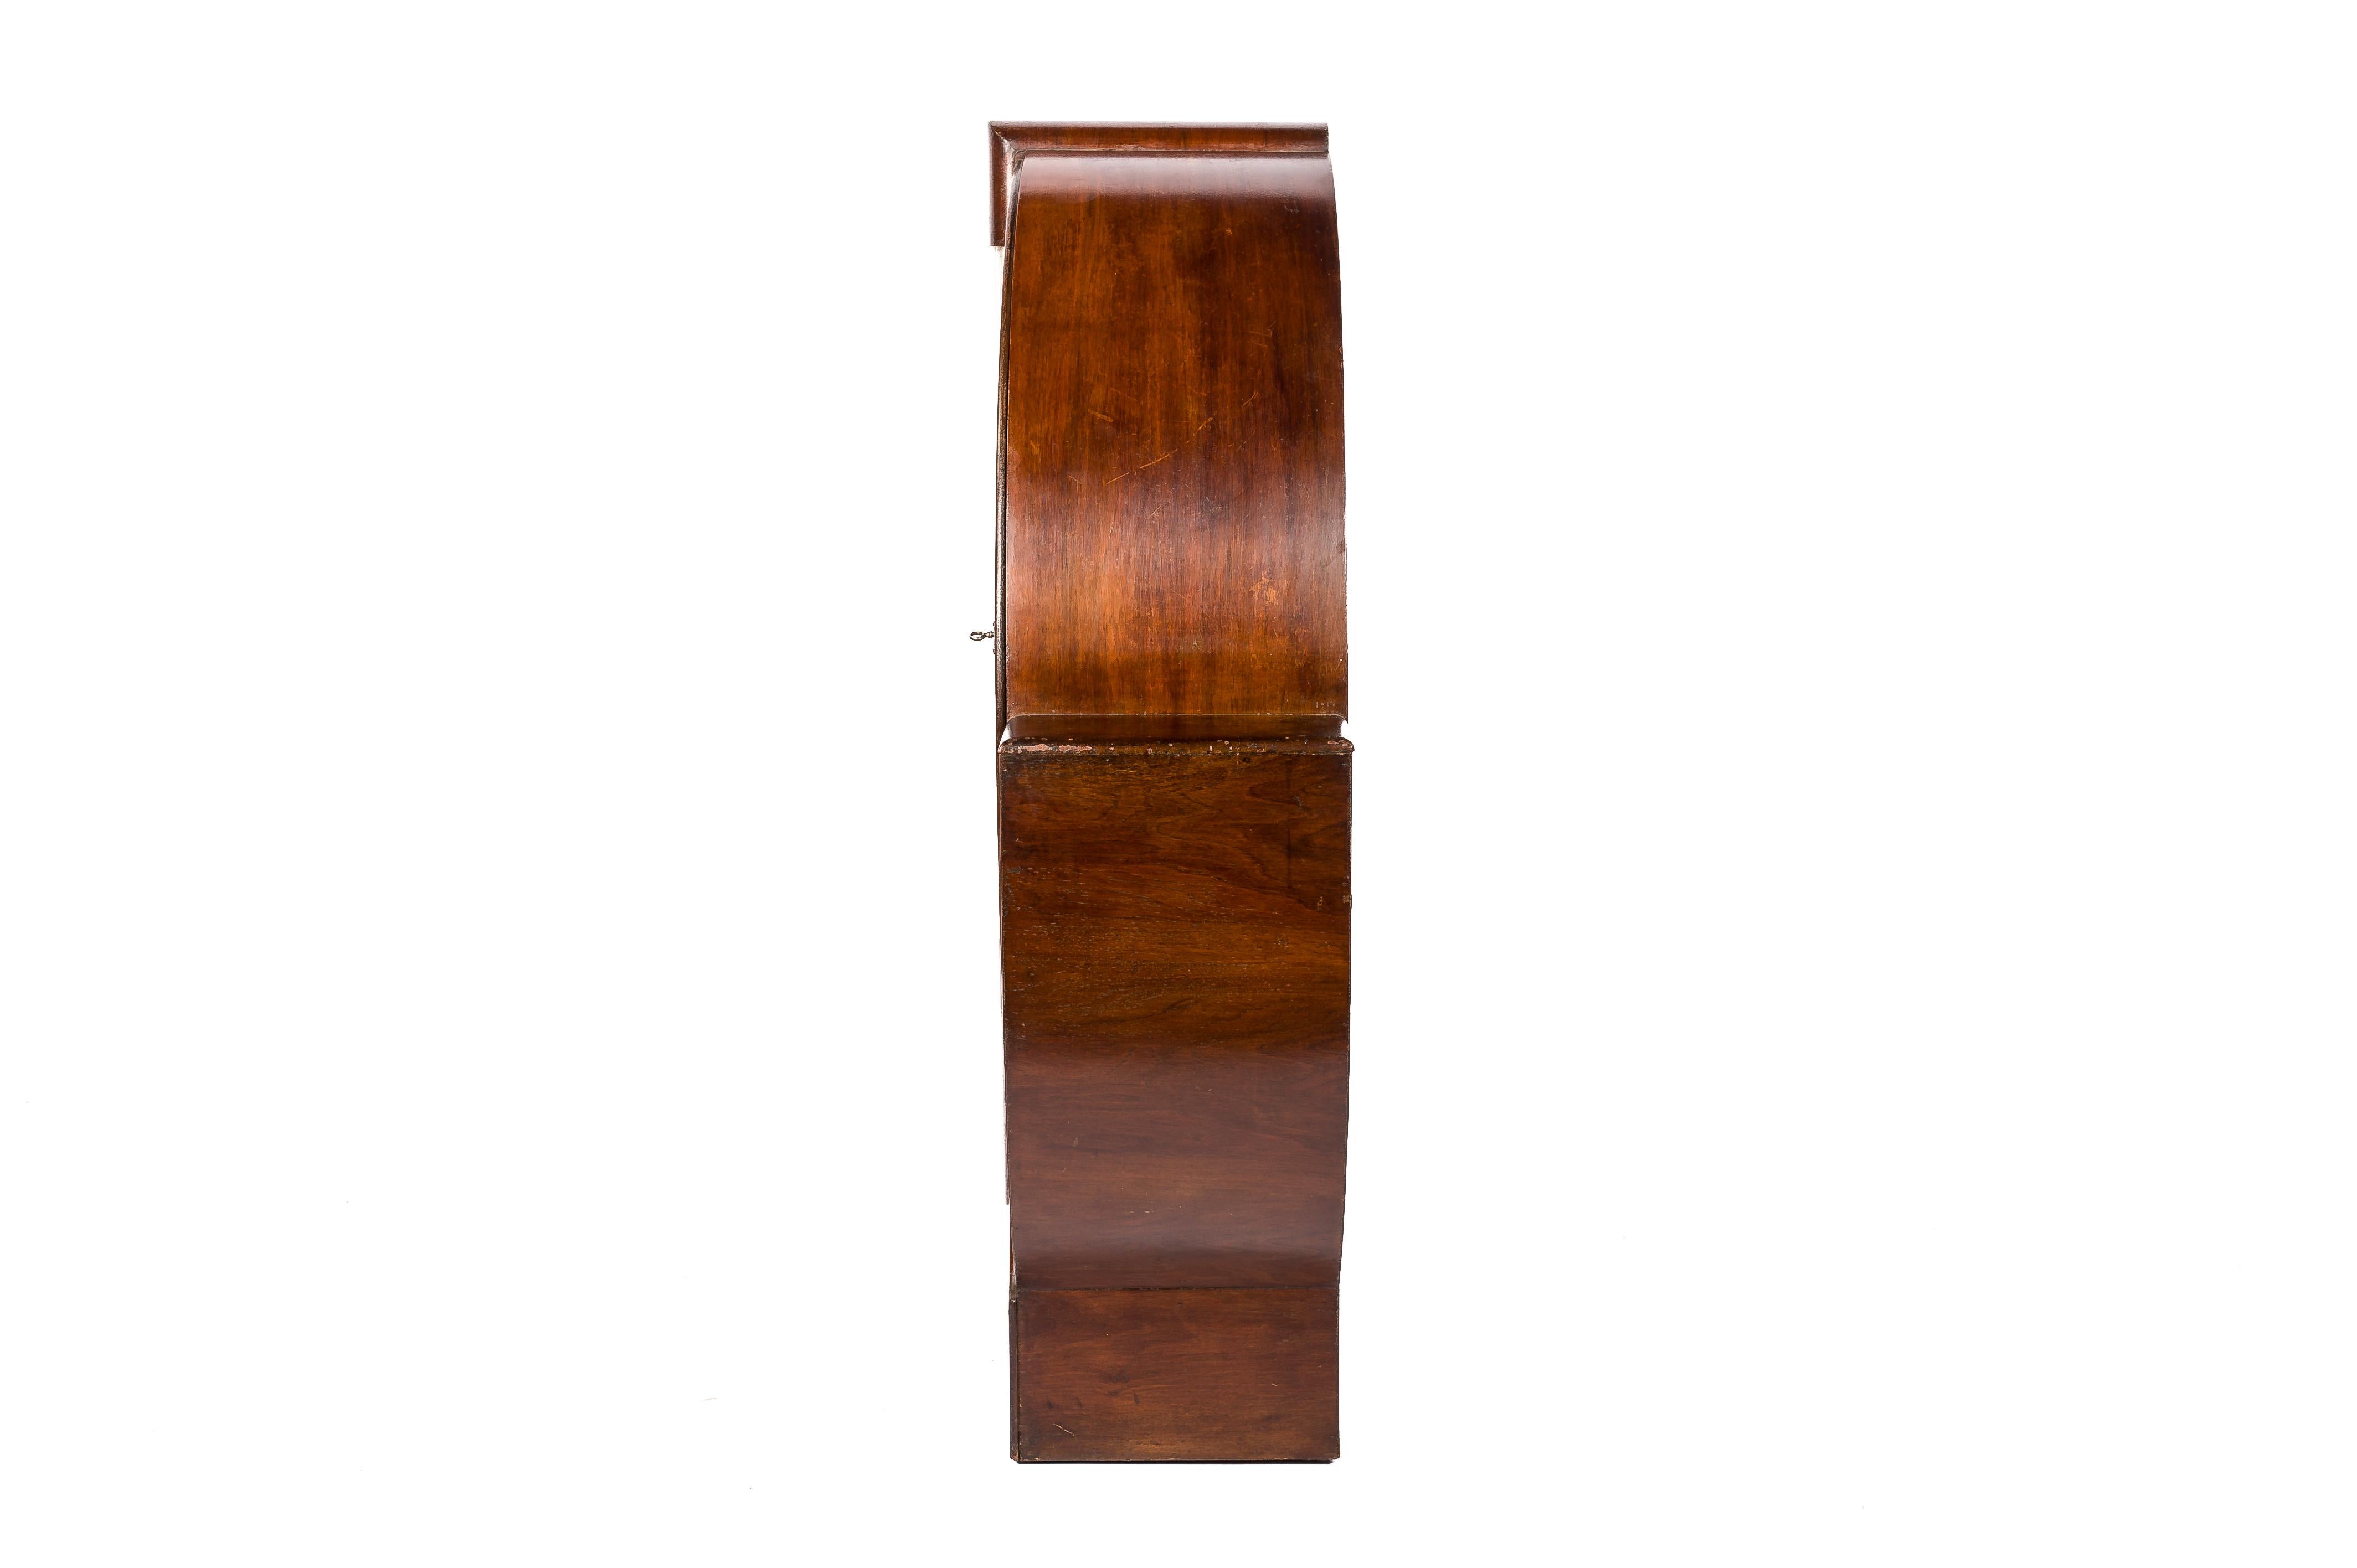 20th Century Antique 20th-Century French Art Deco Mahogany Veneered Display or Bar Cabinet For Sale